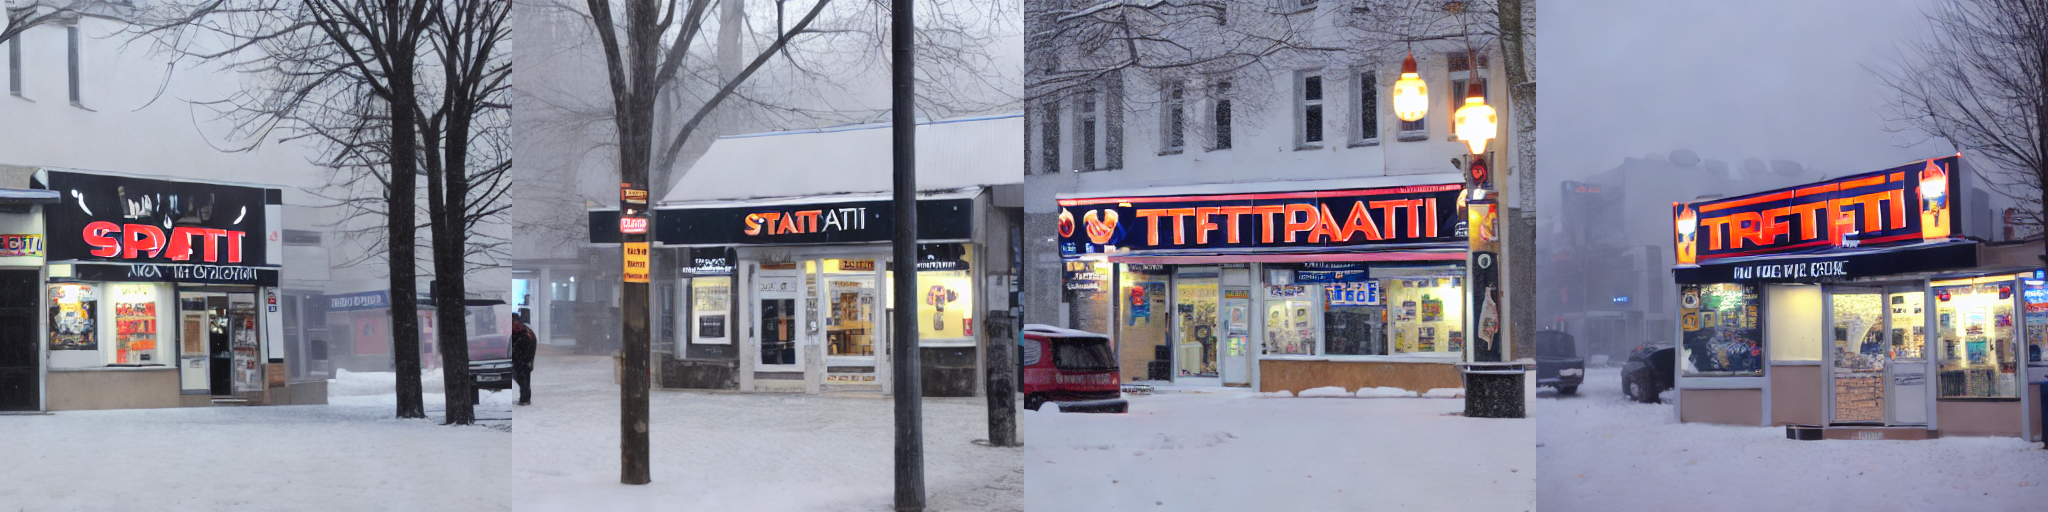 a picture of spaeti store in the snow